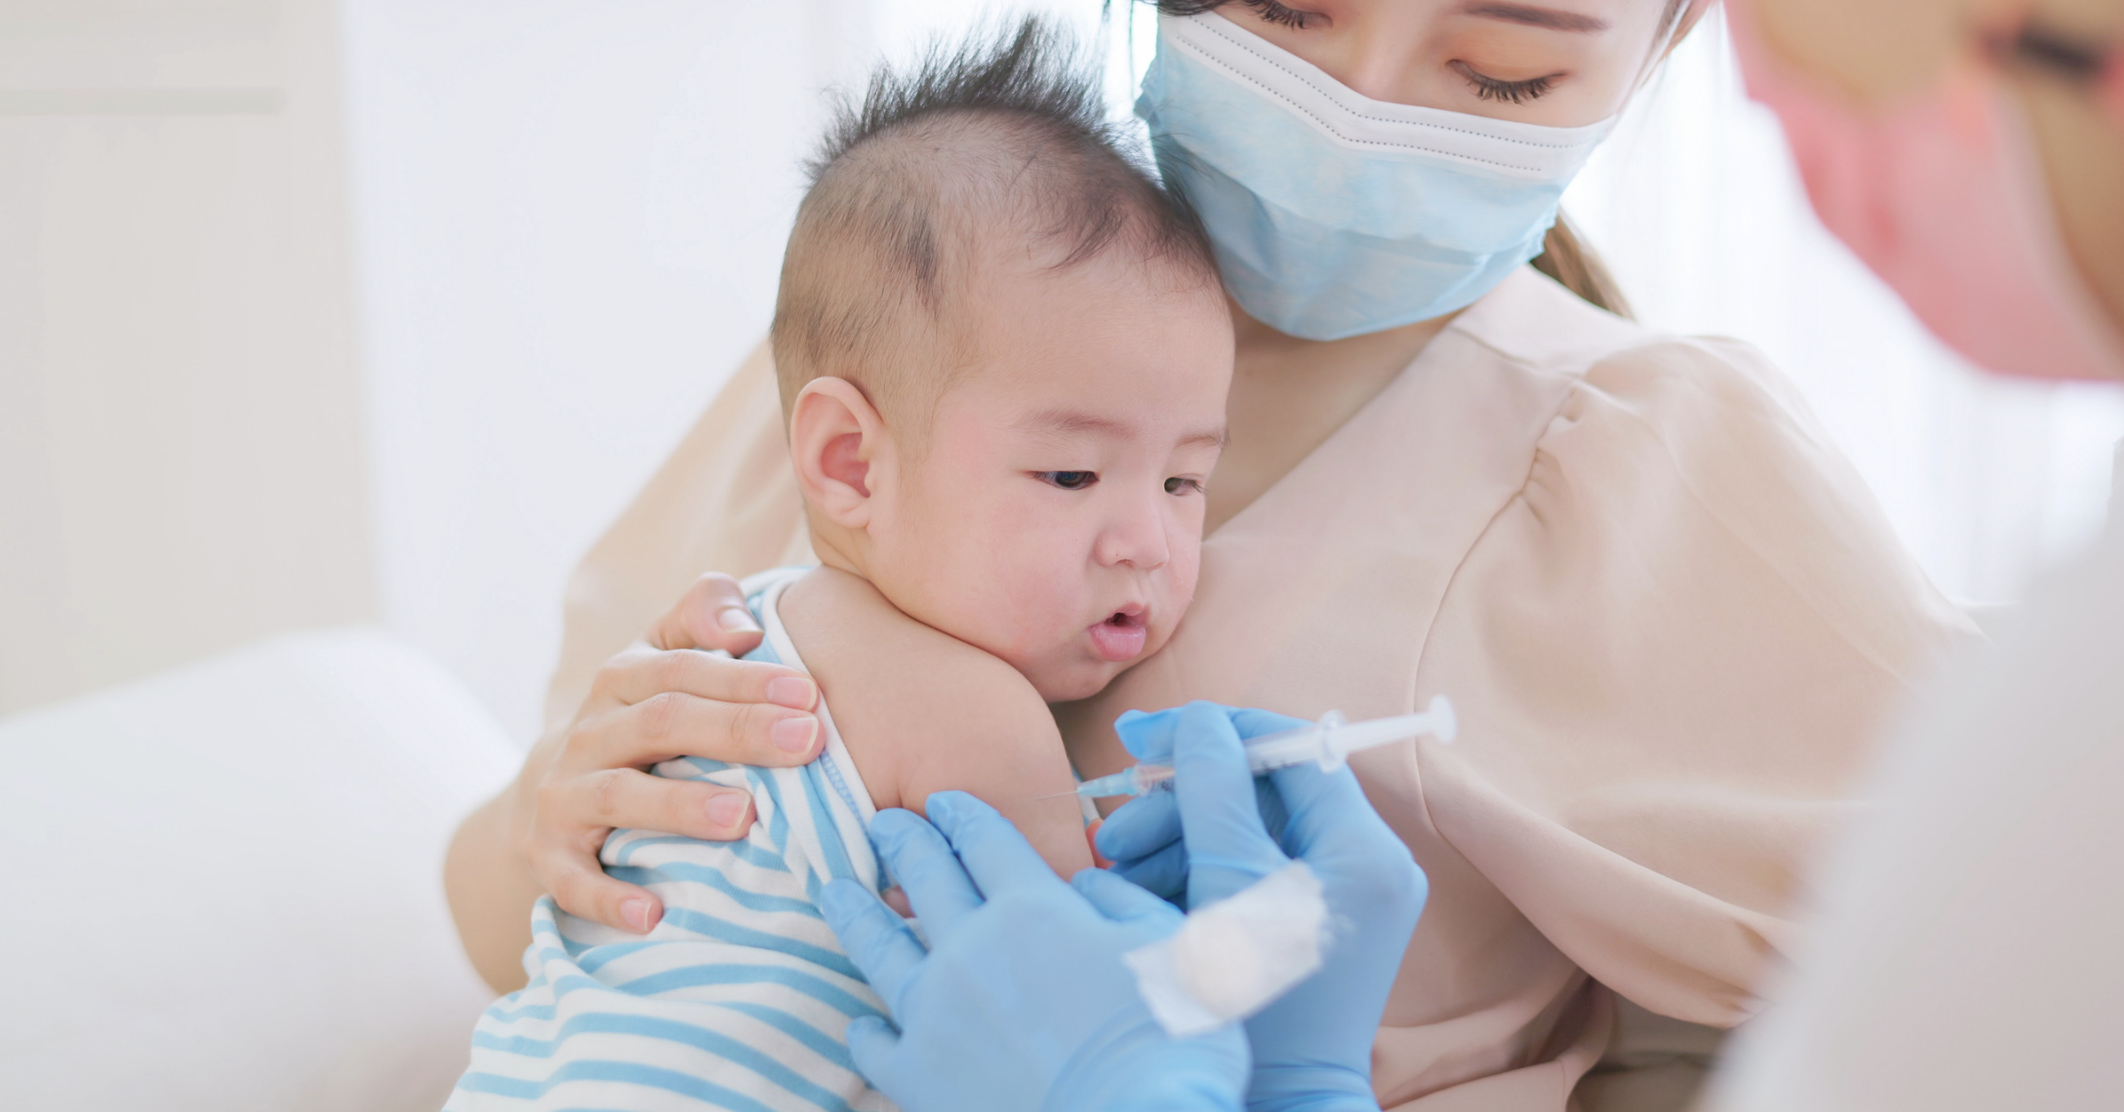 Q & A: Why Is it Important to Vaccinate Infants and Children?